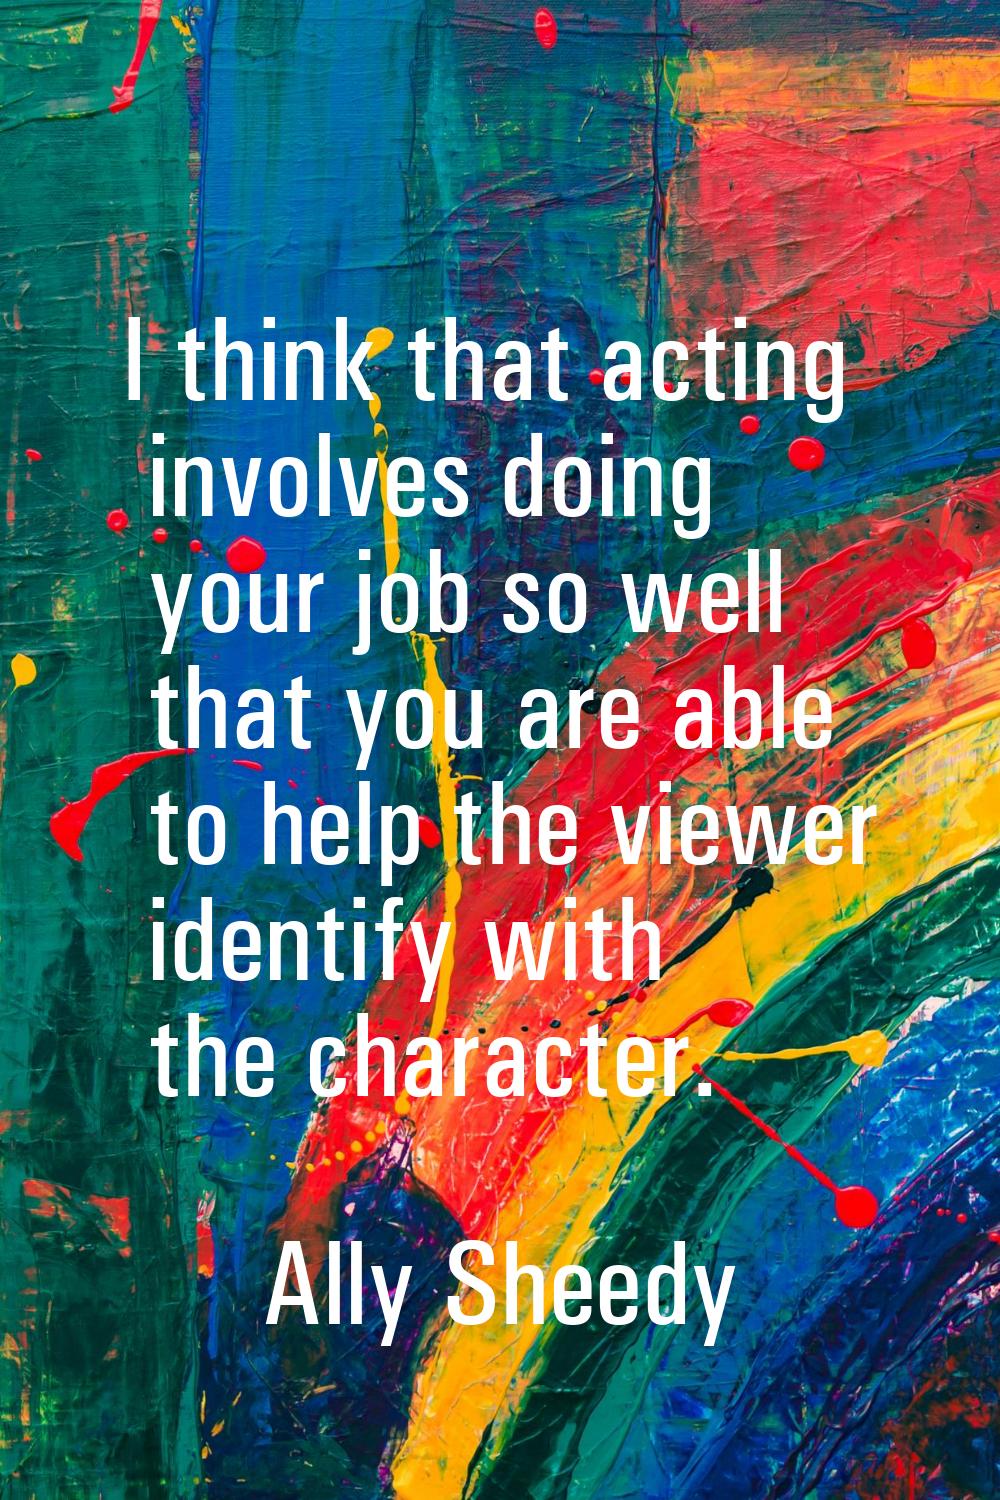 I think that acting involves doing your job so well that you are able to help the viewer identify w